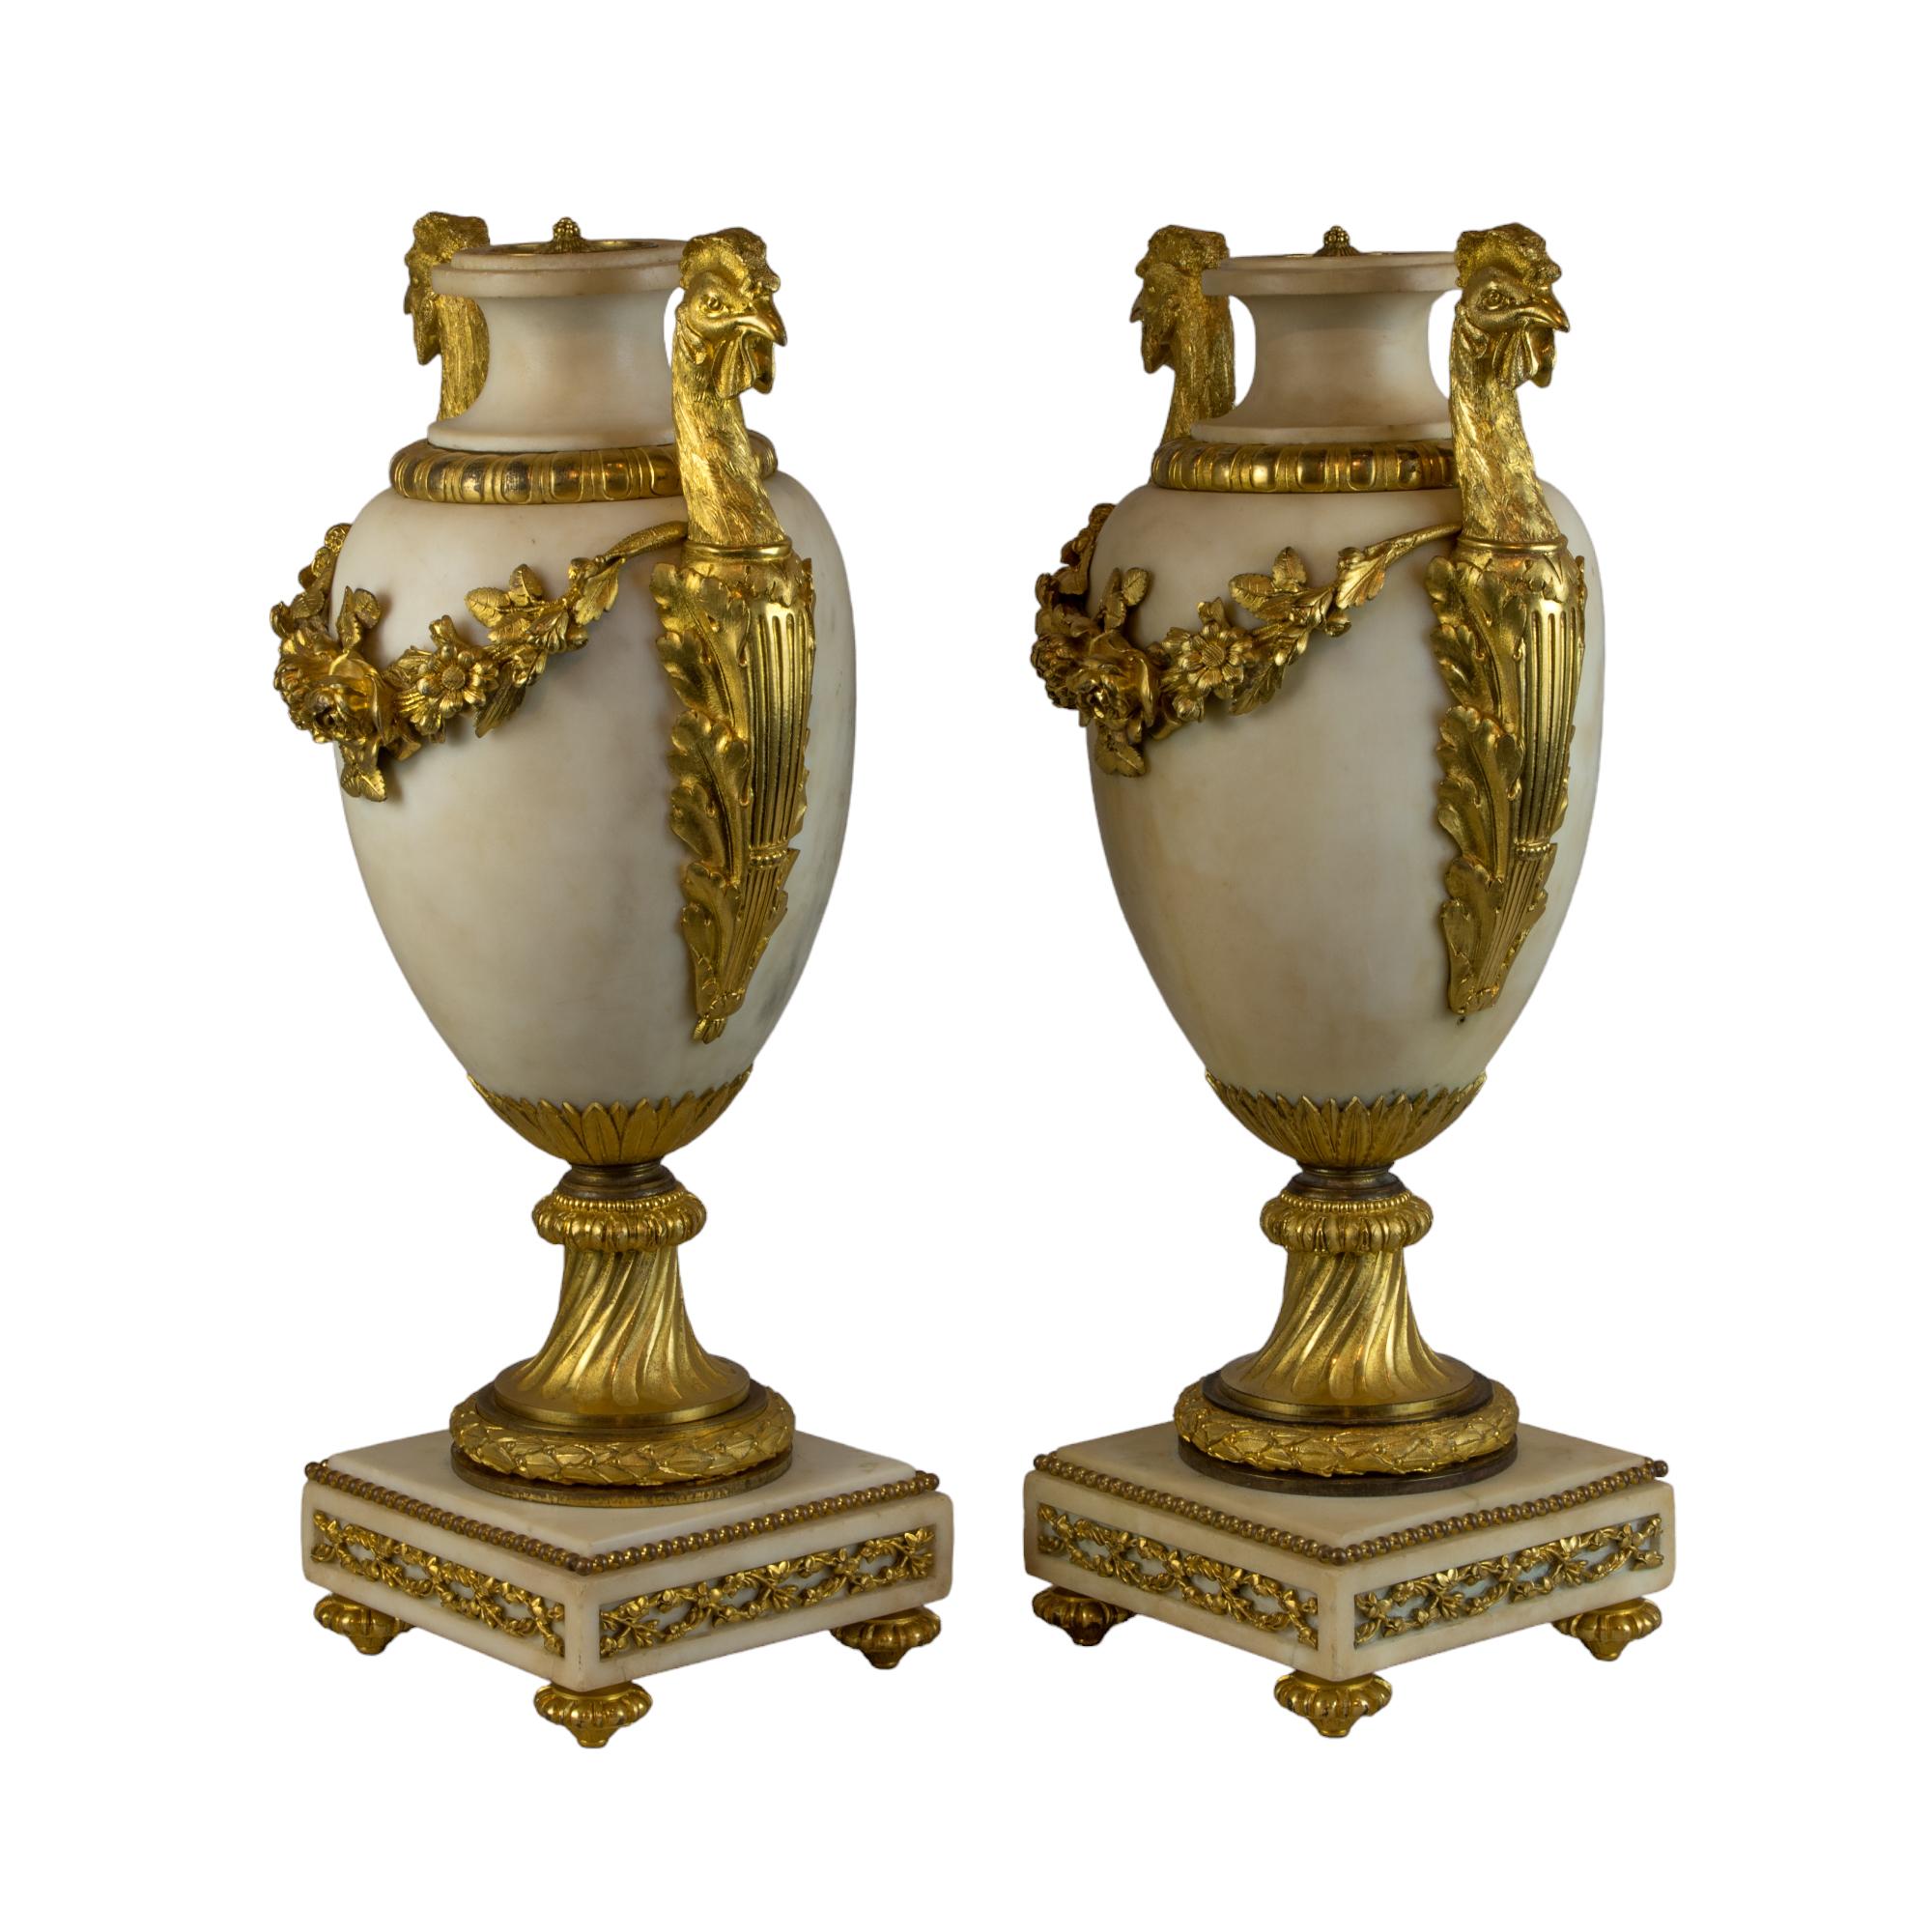 A distinguished pair of Louis XVI style gilt-bronze-mounted white marble urns, epitomizing the neoclassical taste of the 19th century with a harmonious blend of utility and grandeur. Each urn stands as a testament to exquisite craftsmanship,